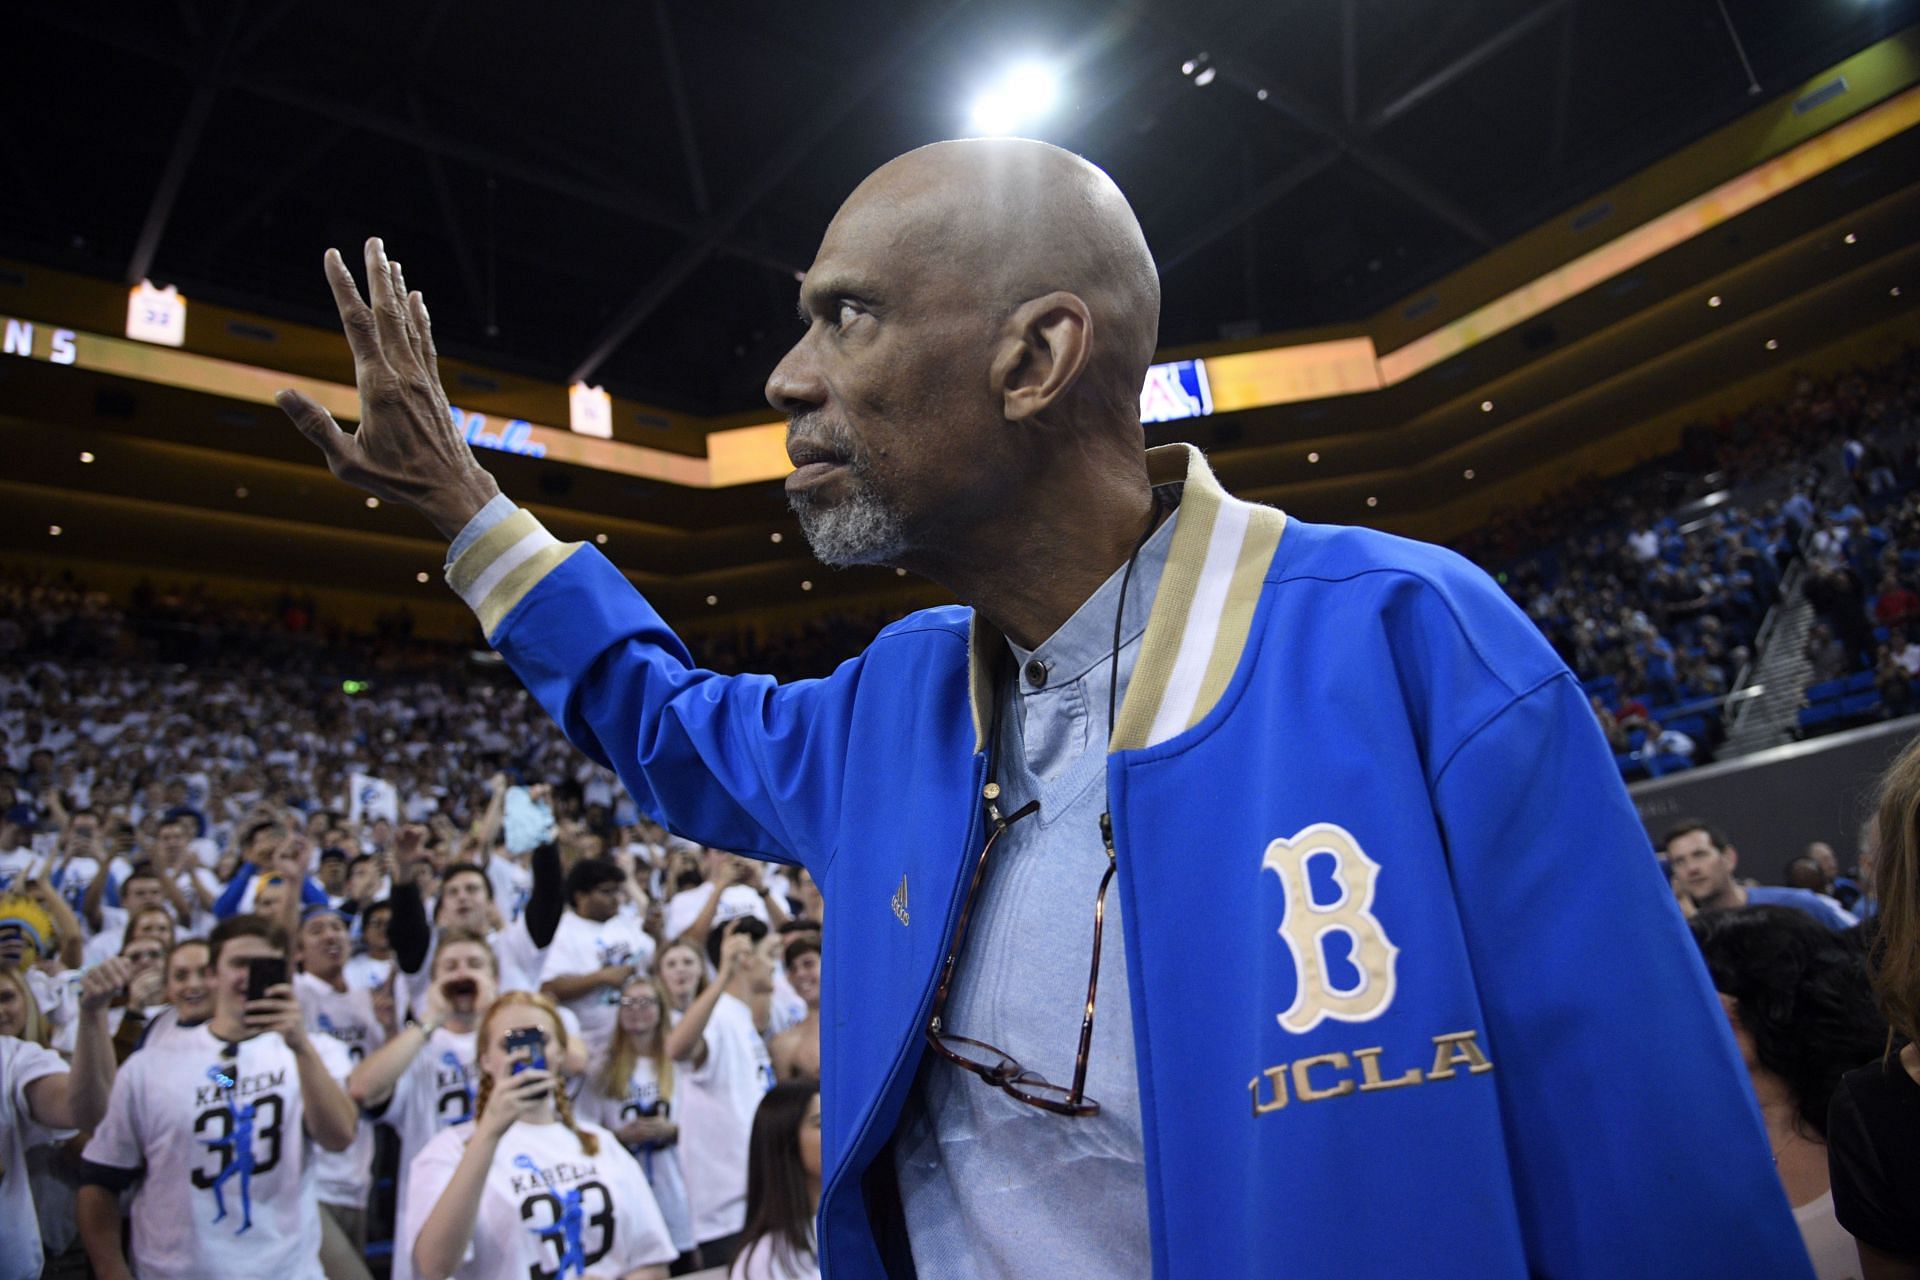 Kareem Abdul-Jabbar waves to fans as he arrive to attend the UCLA Bruins and Arizona Wildcats college basketball game